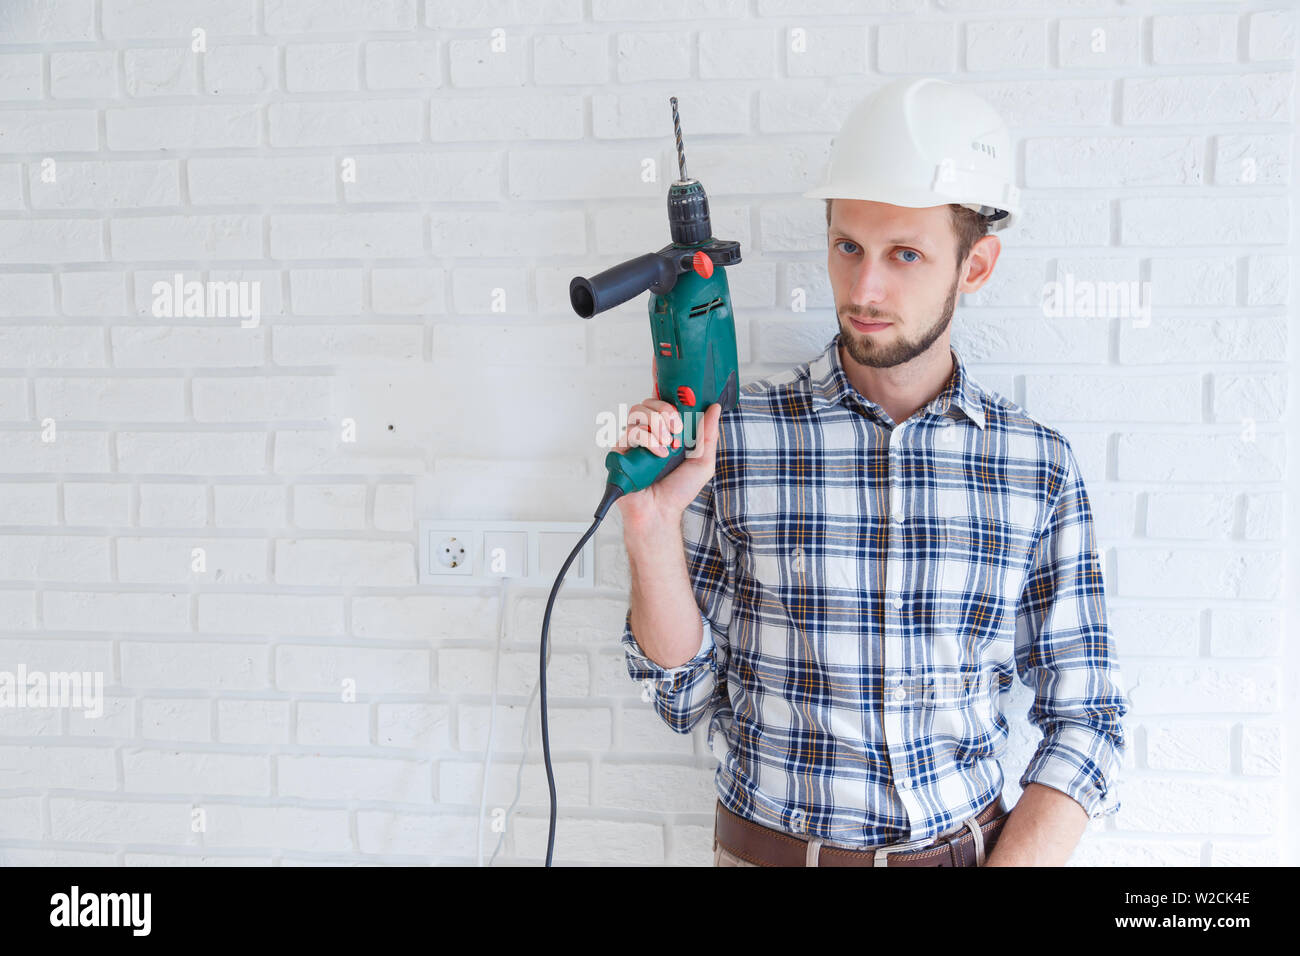 portrait of a constructor holding a drill Stock Photo